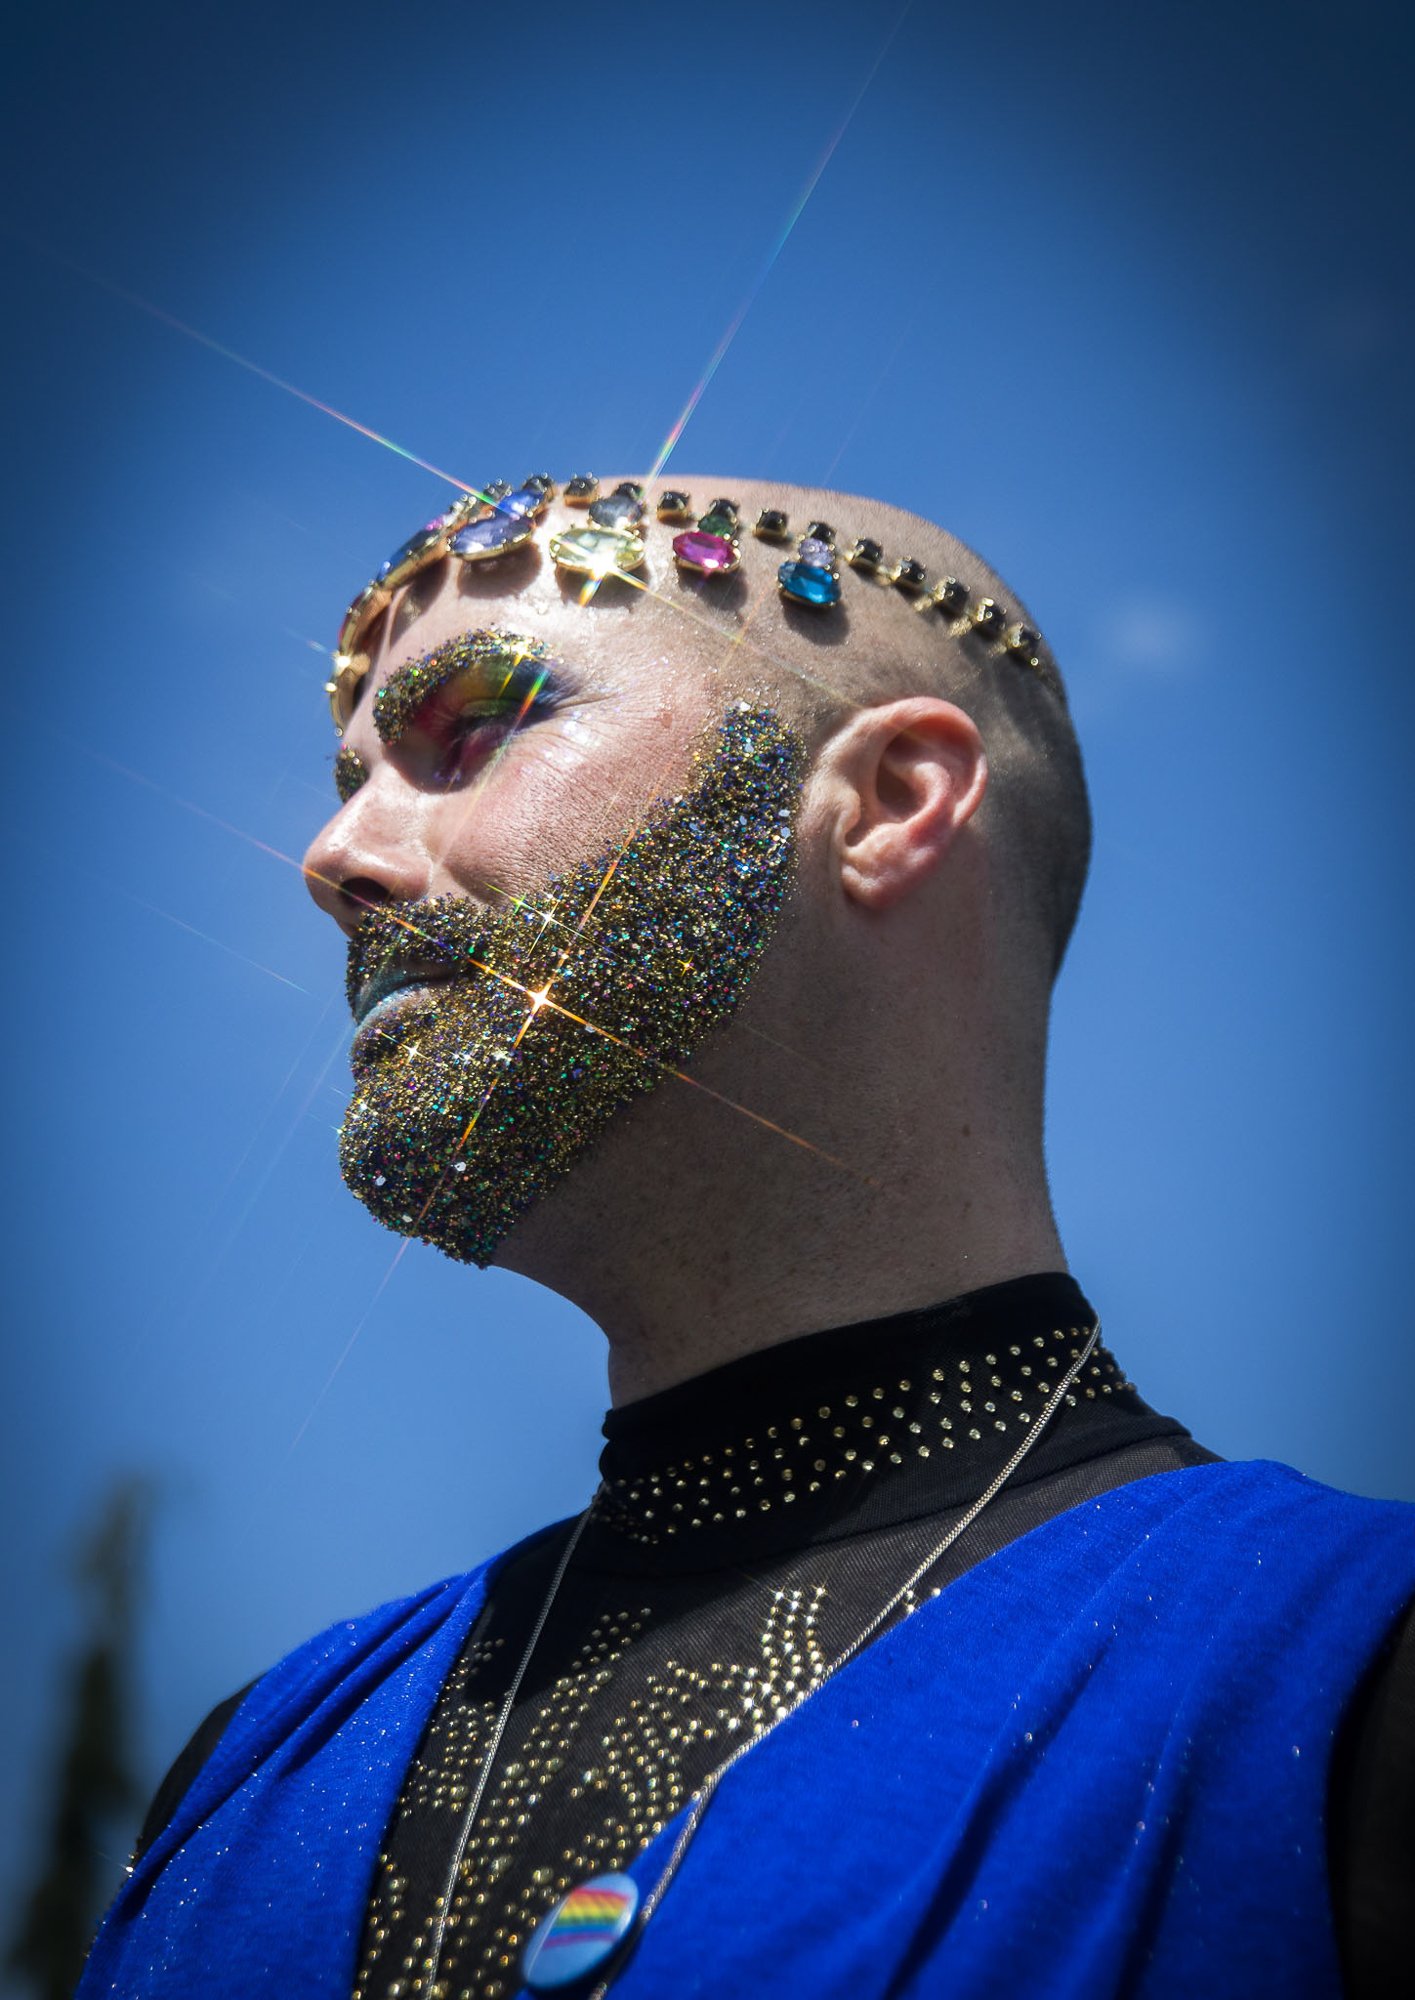  Gina Touche’s glitter beard and jewels shine in the sunlight at Arlington’s first-ever Pride celebration on Saturday, June 4, 2022. An estimated 300 people attended Arlington’s first-ever Pride celebration, and an estimated 800 turned out for a simi